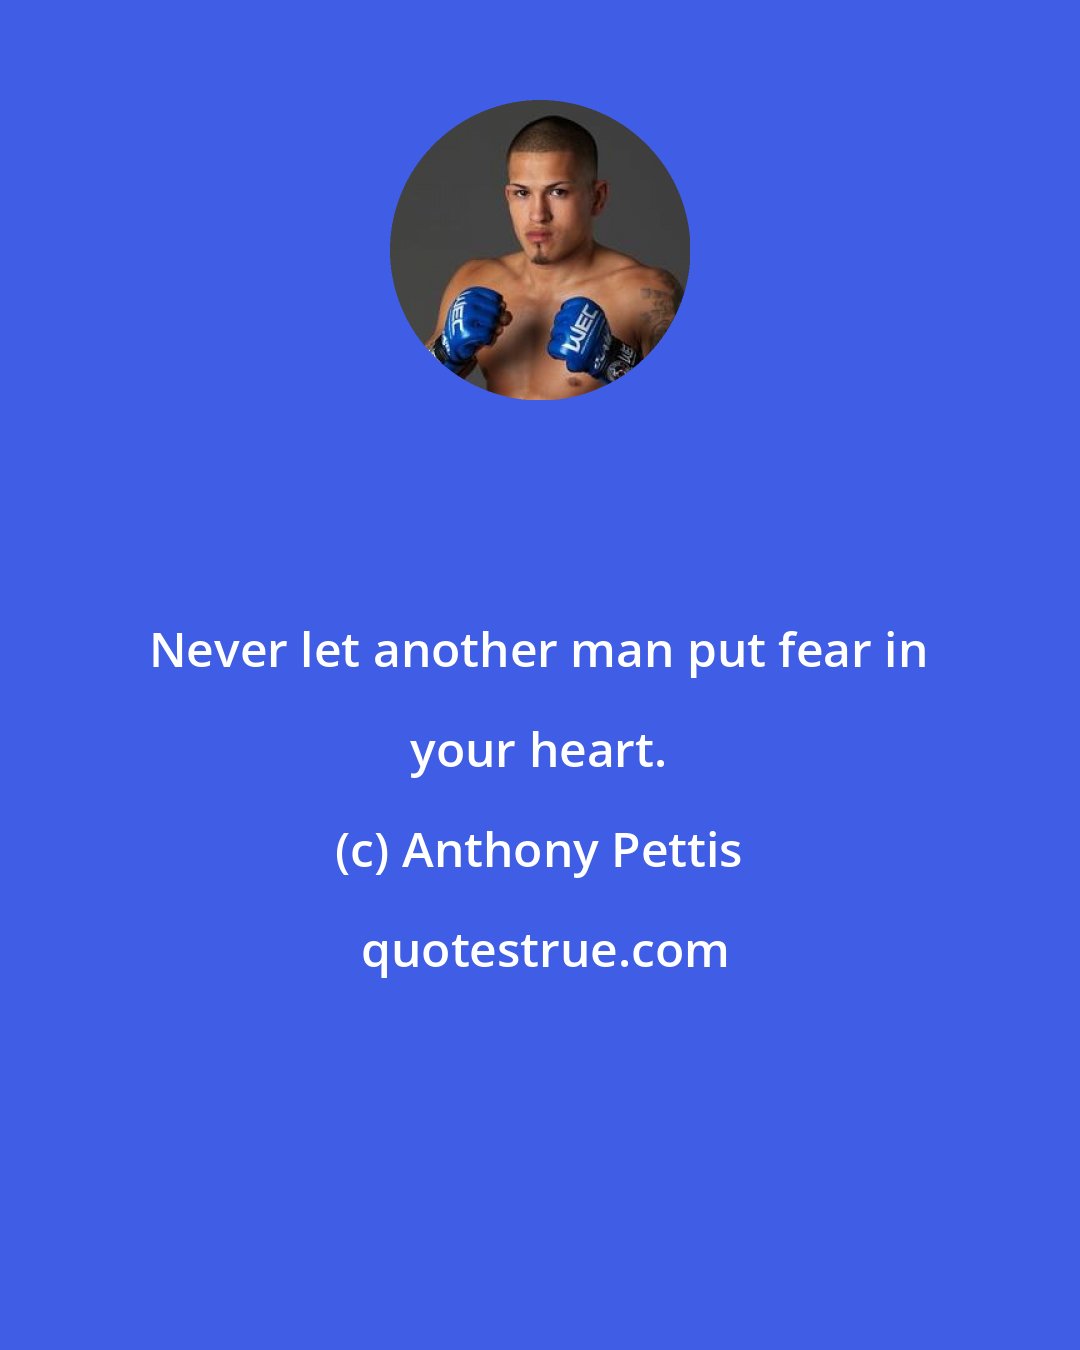 Anthony Pettis: Never let another man put fear in your heart.